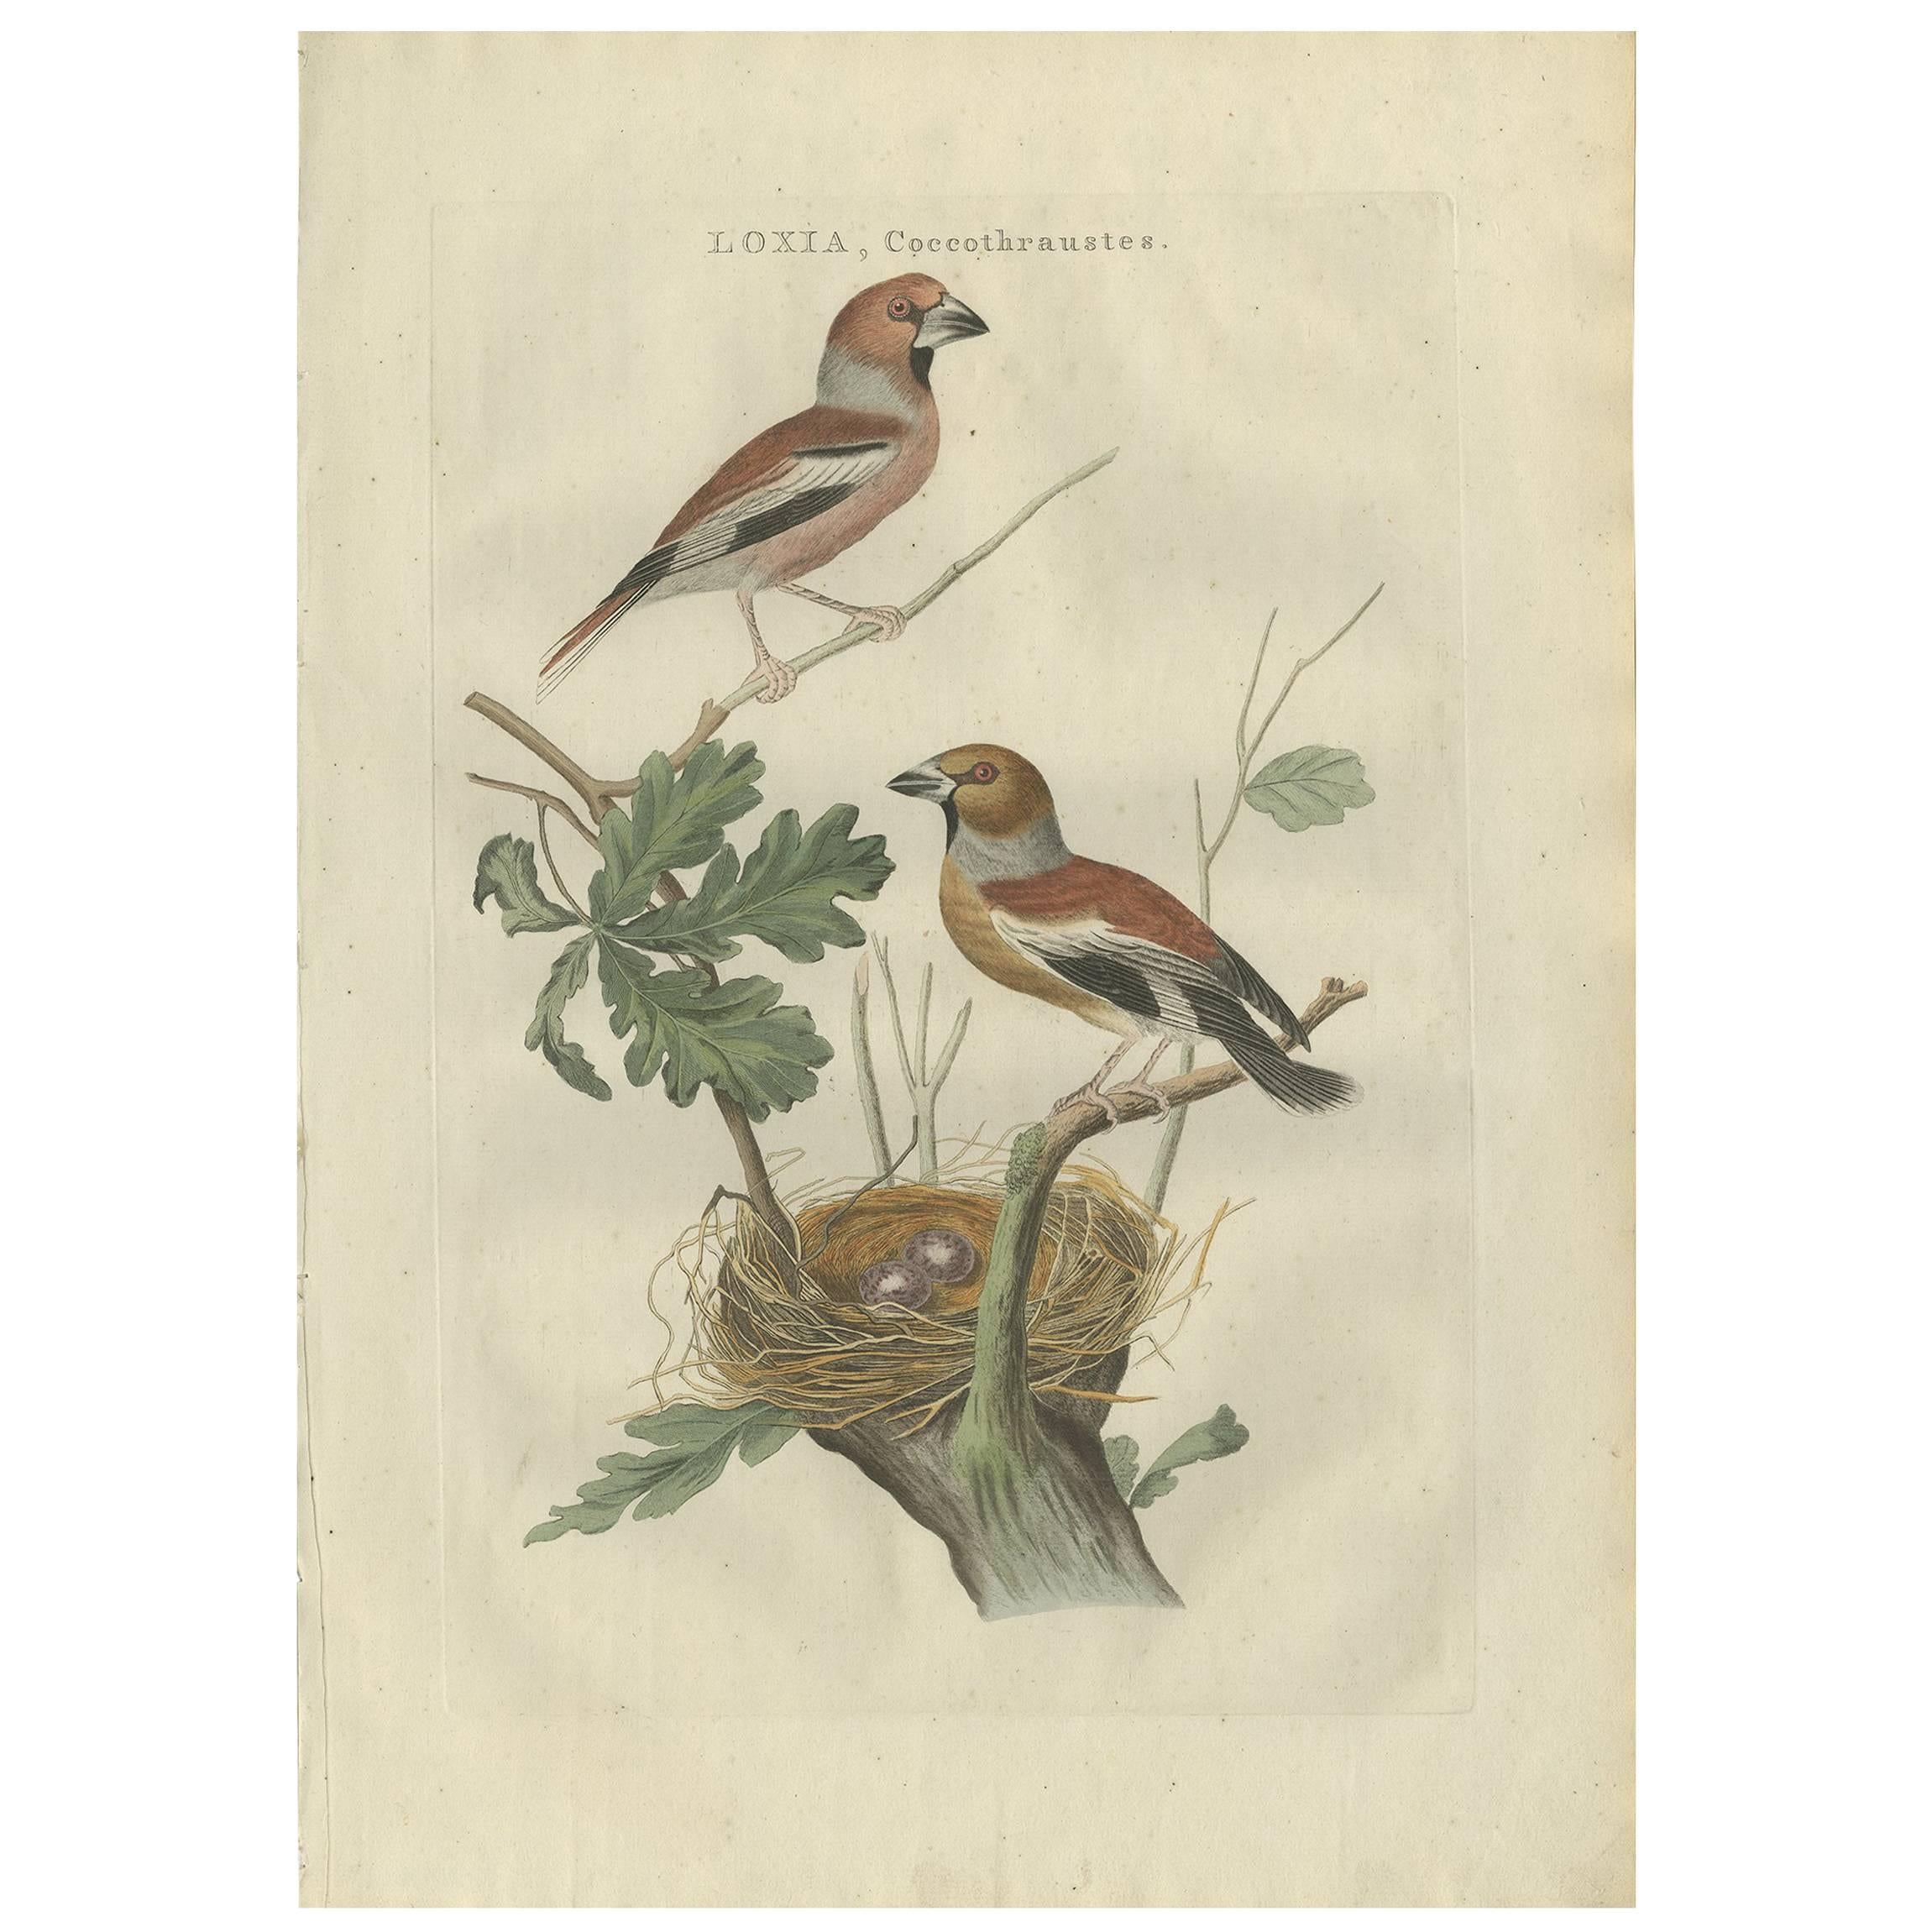 Antique Bird Print of the Hawfinch by Sepp & Nozeman, 1789